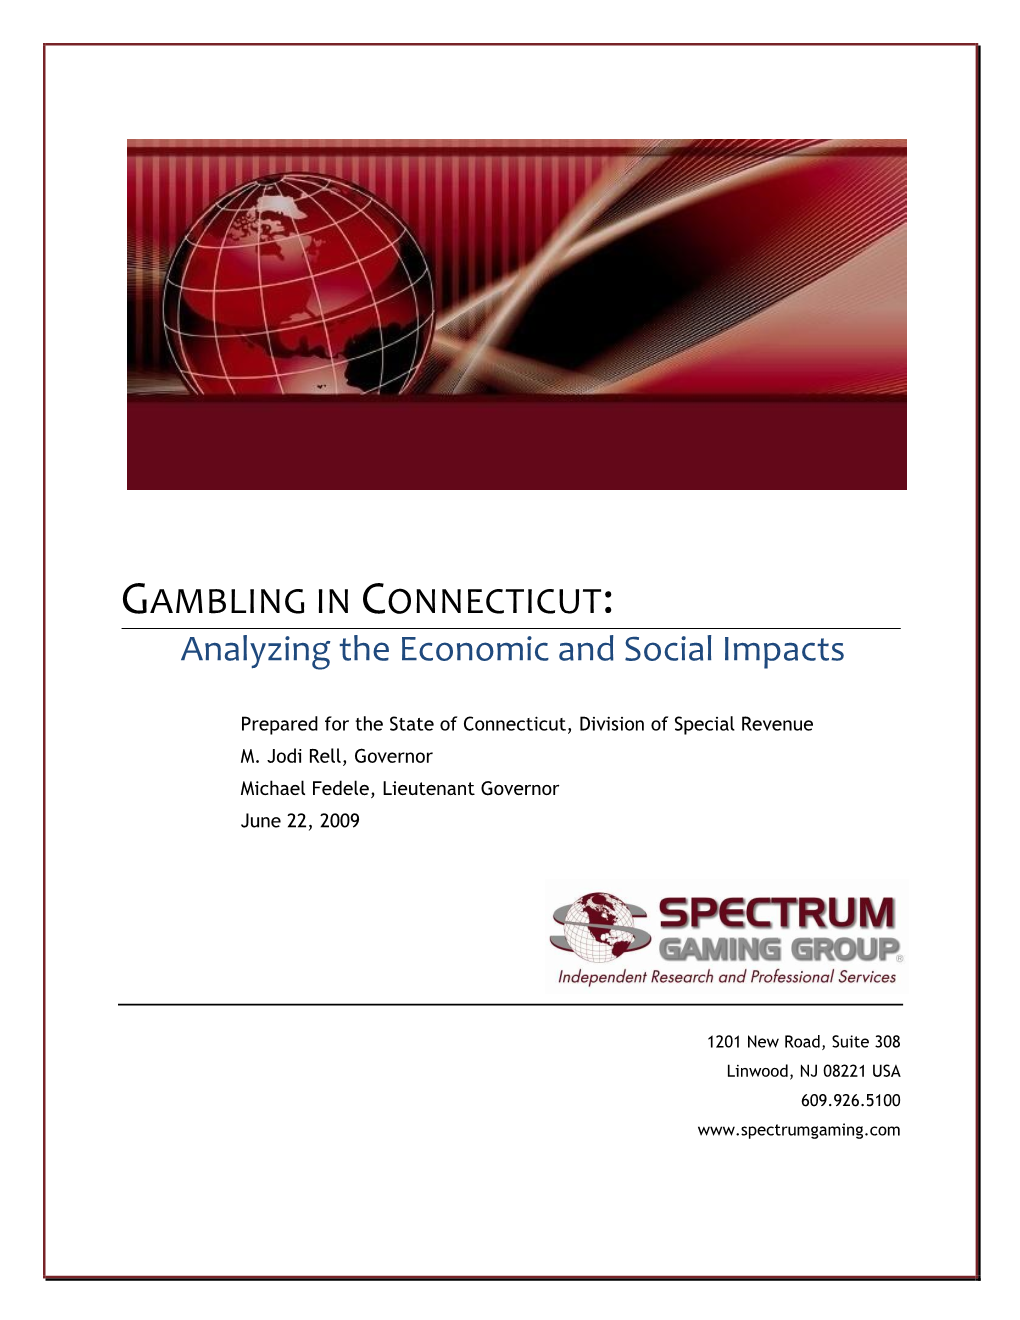 GAMBLING in CONNECTICUT: Analyzing the Economic and Social Impacts